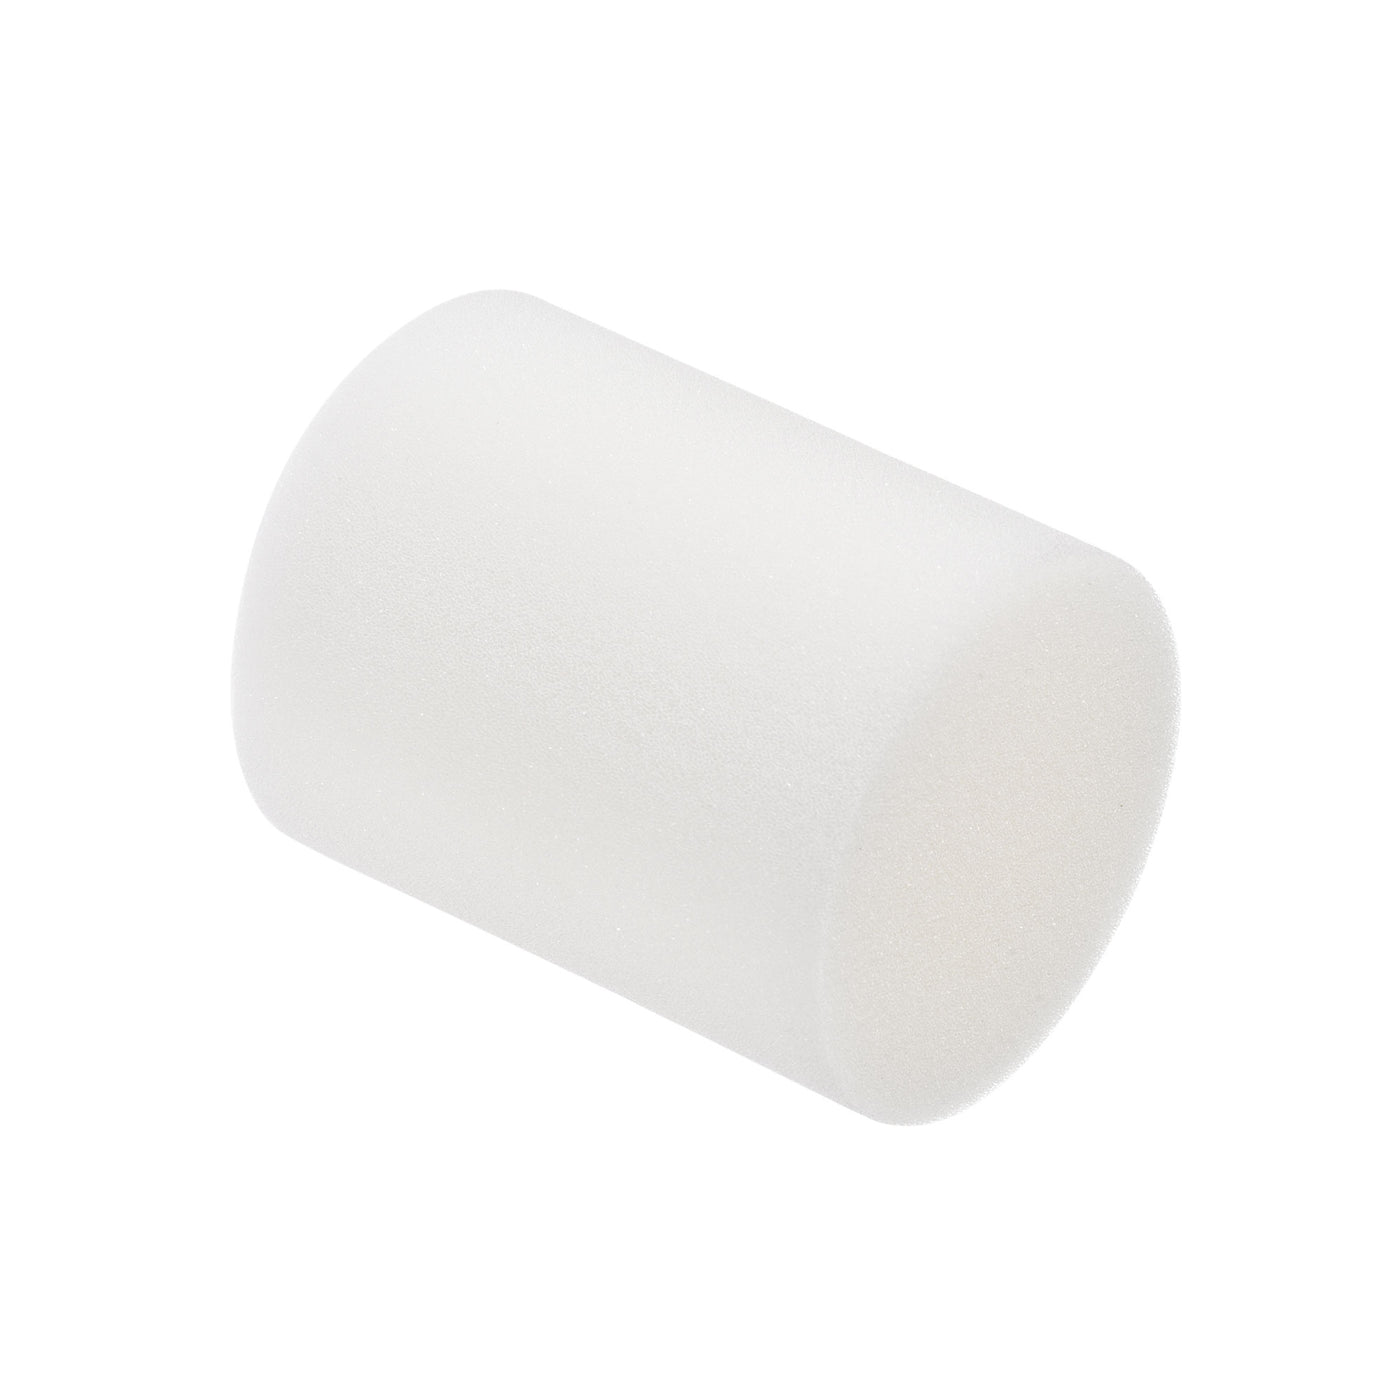 uxcell Uxcell Cup Turner Foam, White 75x72x90mm for 3/4 Inch PVC Pipe Tumbler 10oz-40oz 4 Pcs